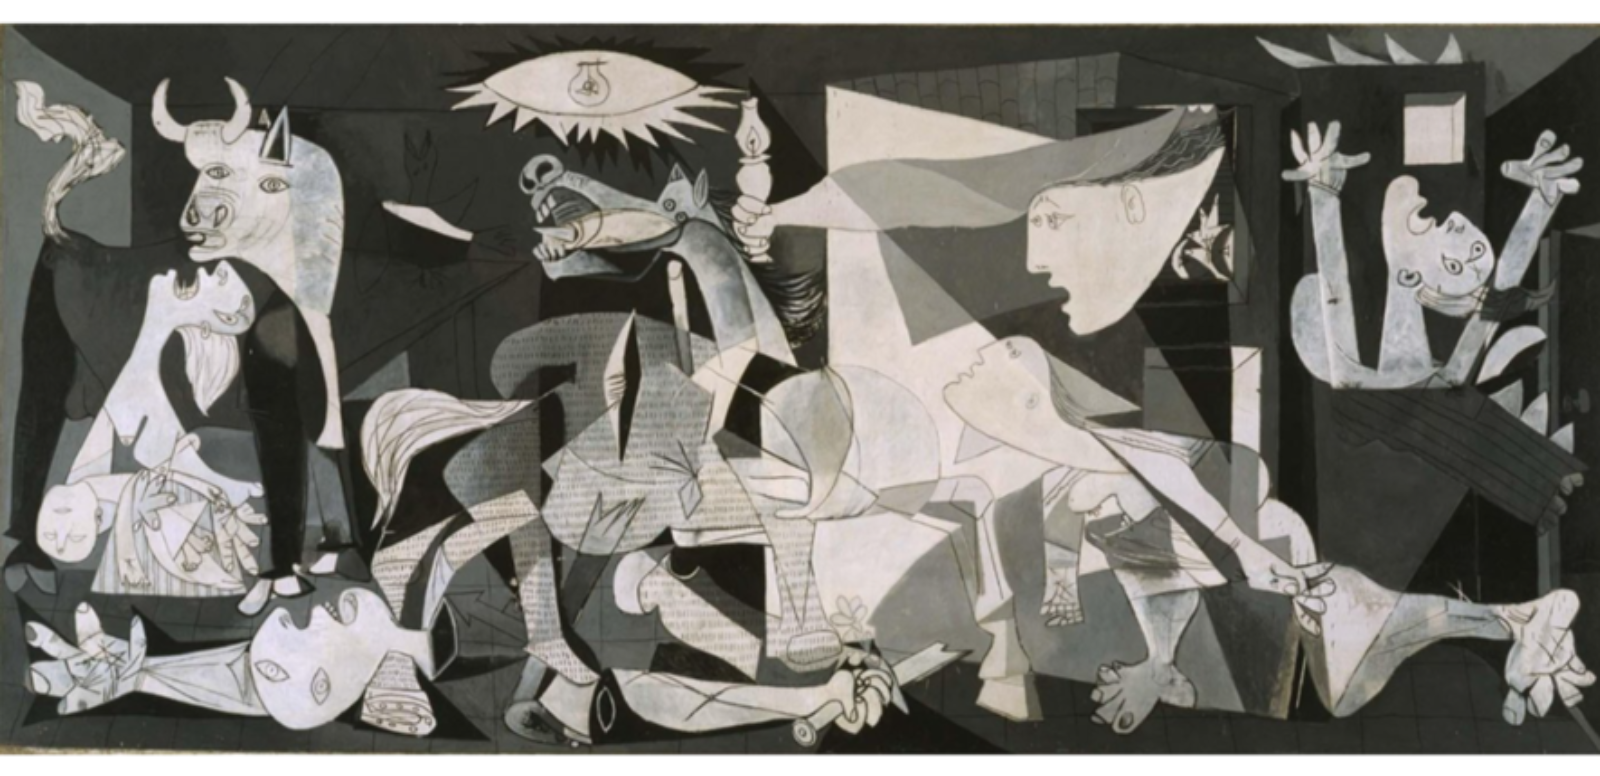 PICASSO AND HIS MOST INFLUENTIAL MASTERPIECES | Picasso